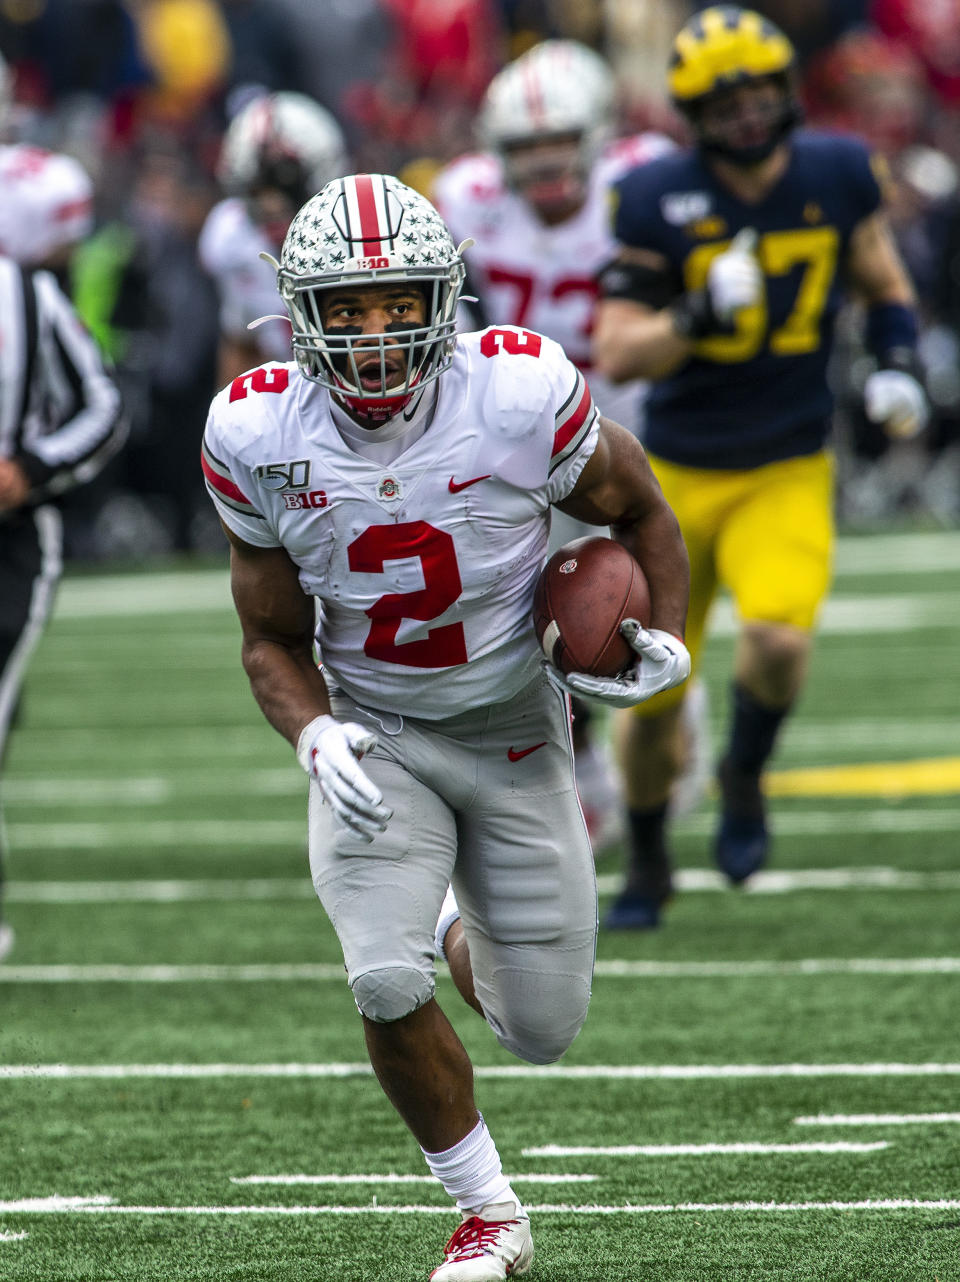 Ohio State running back J.K. Dobbins (2) rushes in the first quarter of an NCAA college football game against Michigan in Ann Arbor, Mich., Saturday, Nov. 30, 2019. (AP Photo/Tony Ding)